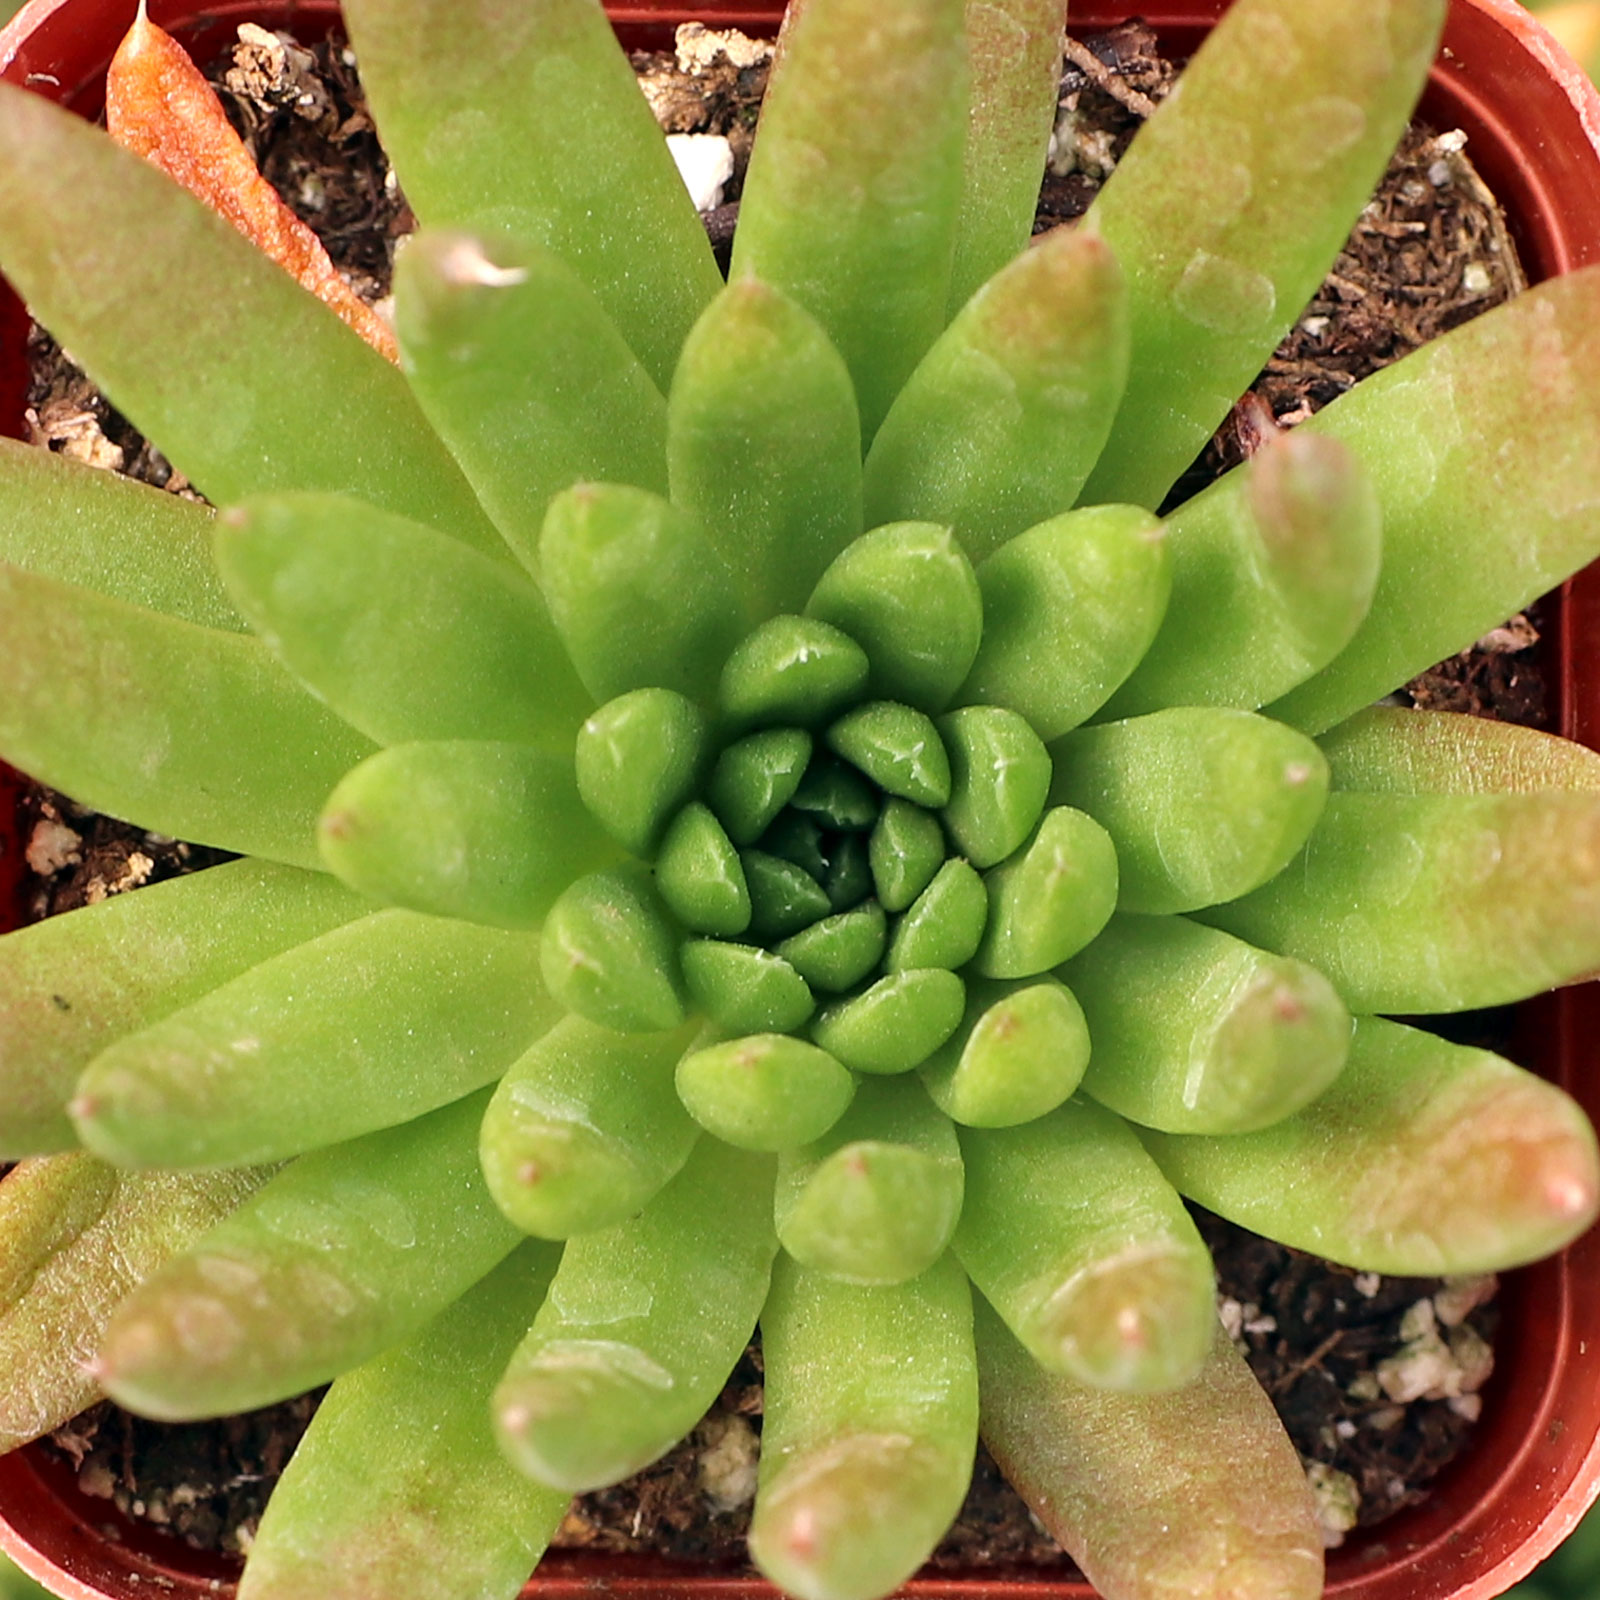 Is November too late to plant hardy succulents (i.e.Dunce Cap) outside in zone 6? Winter inside till spring?